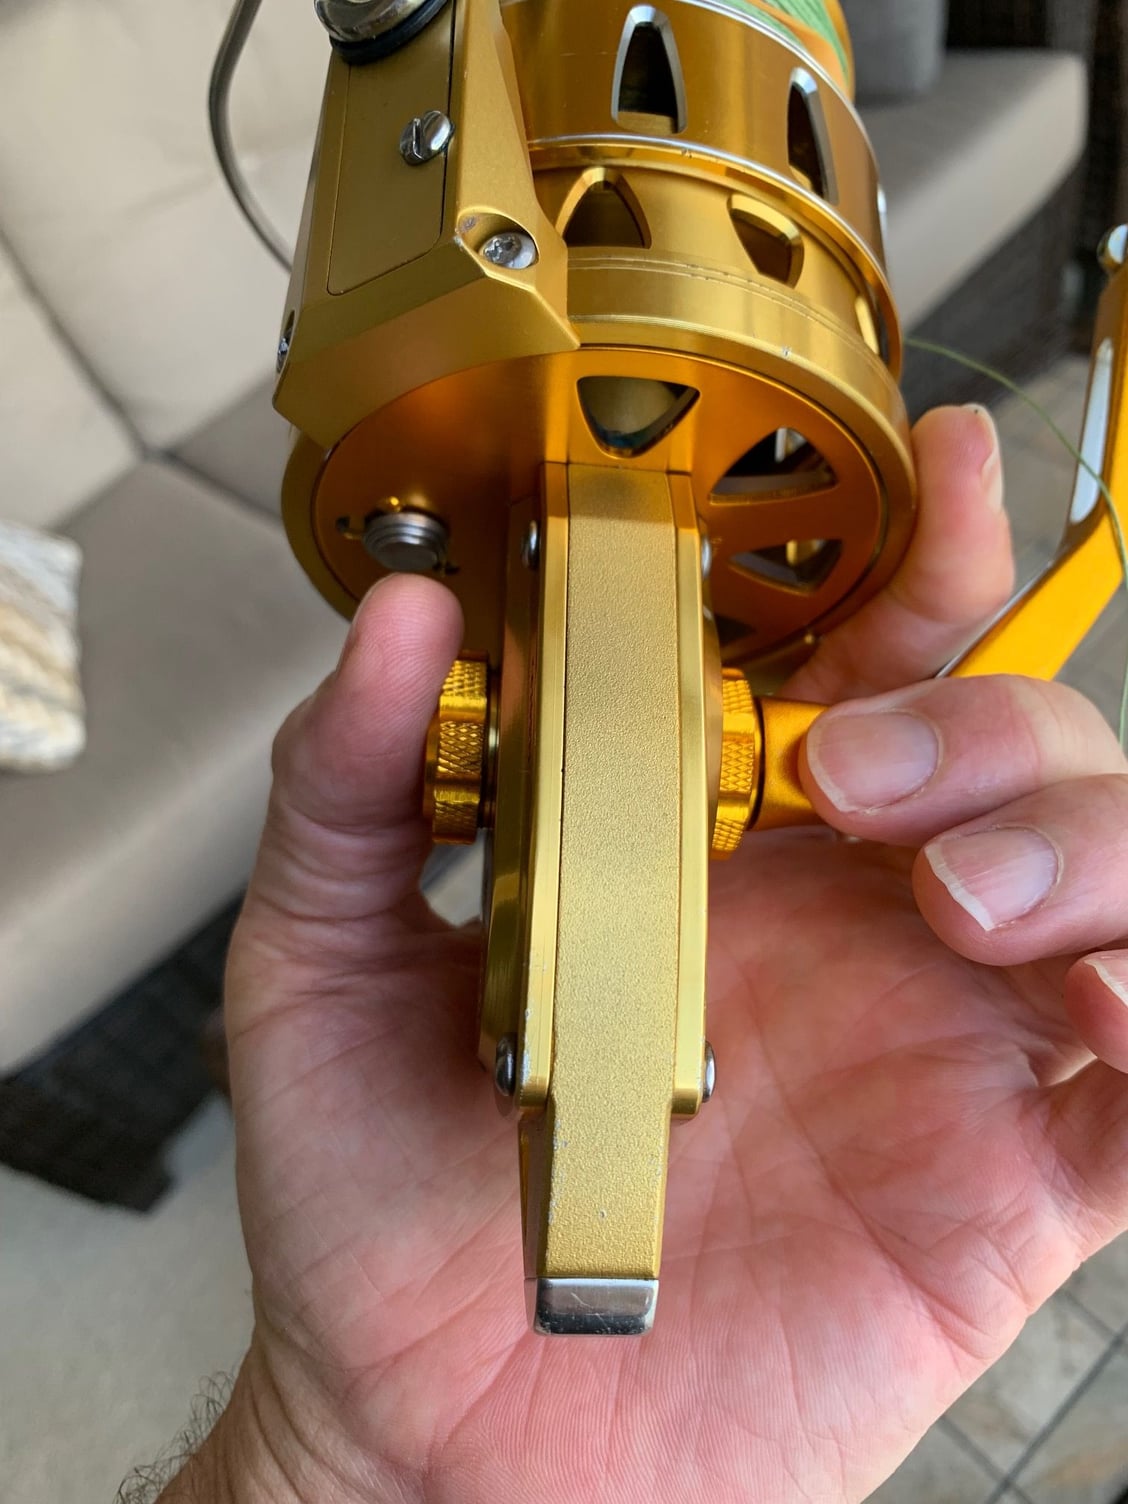 For Sale Torque Spinng Reels - The Hull Truth - Boating and